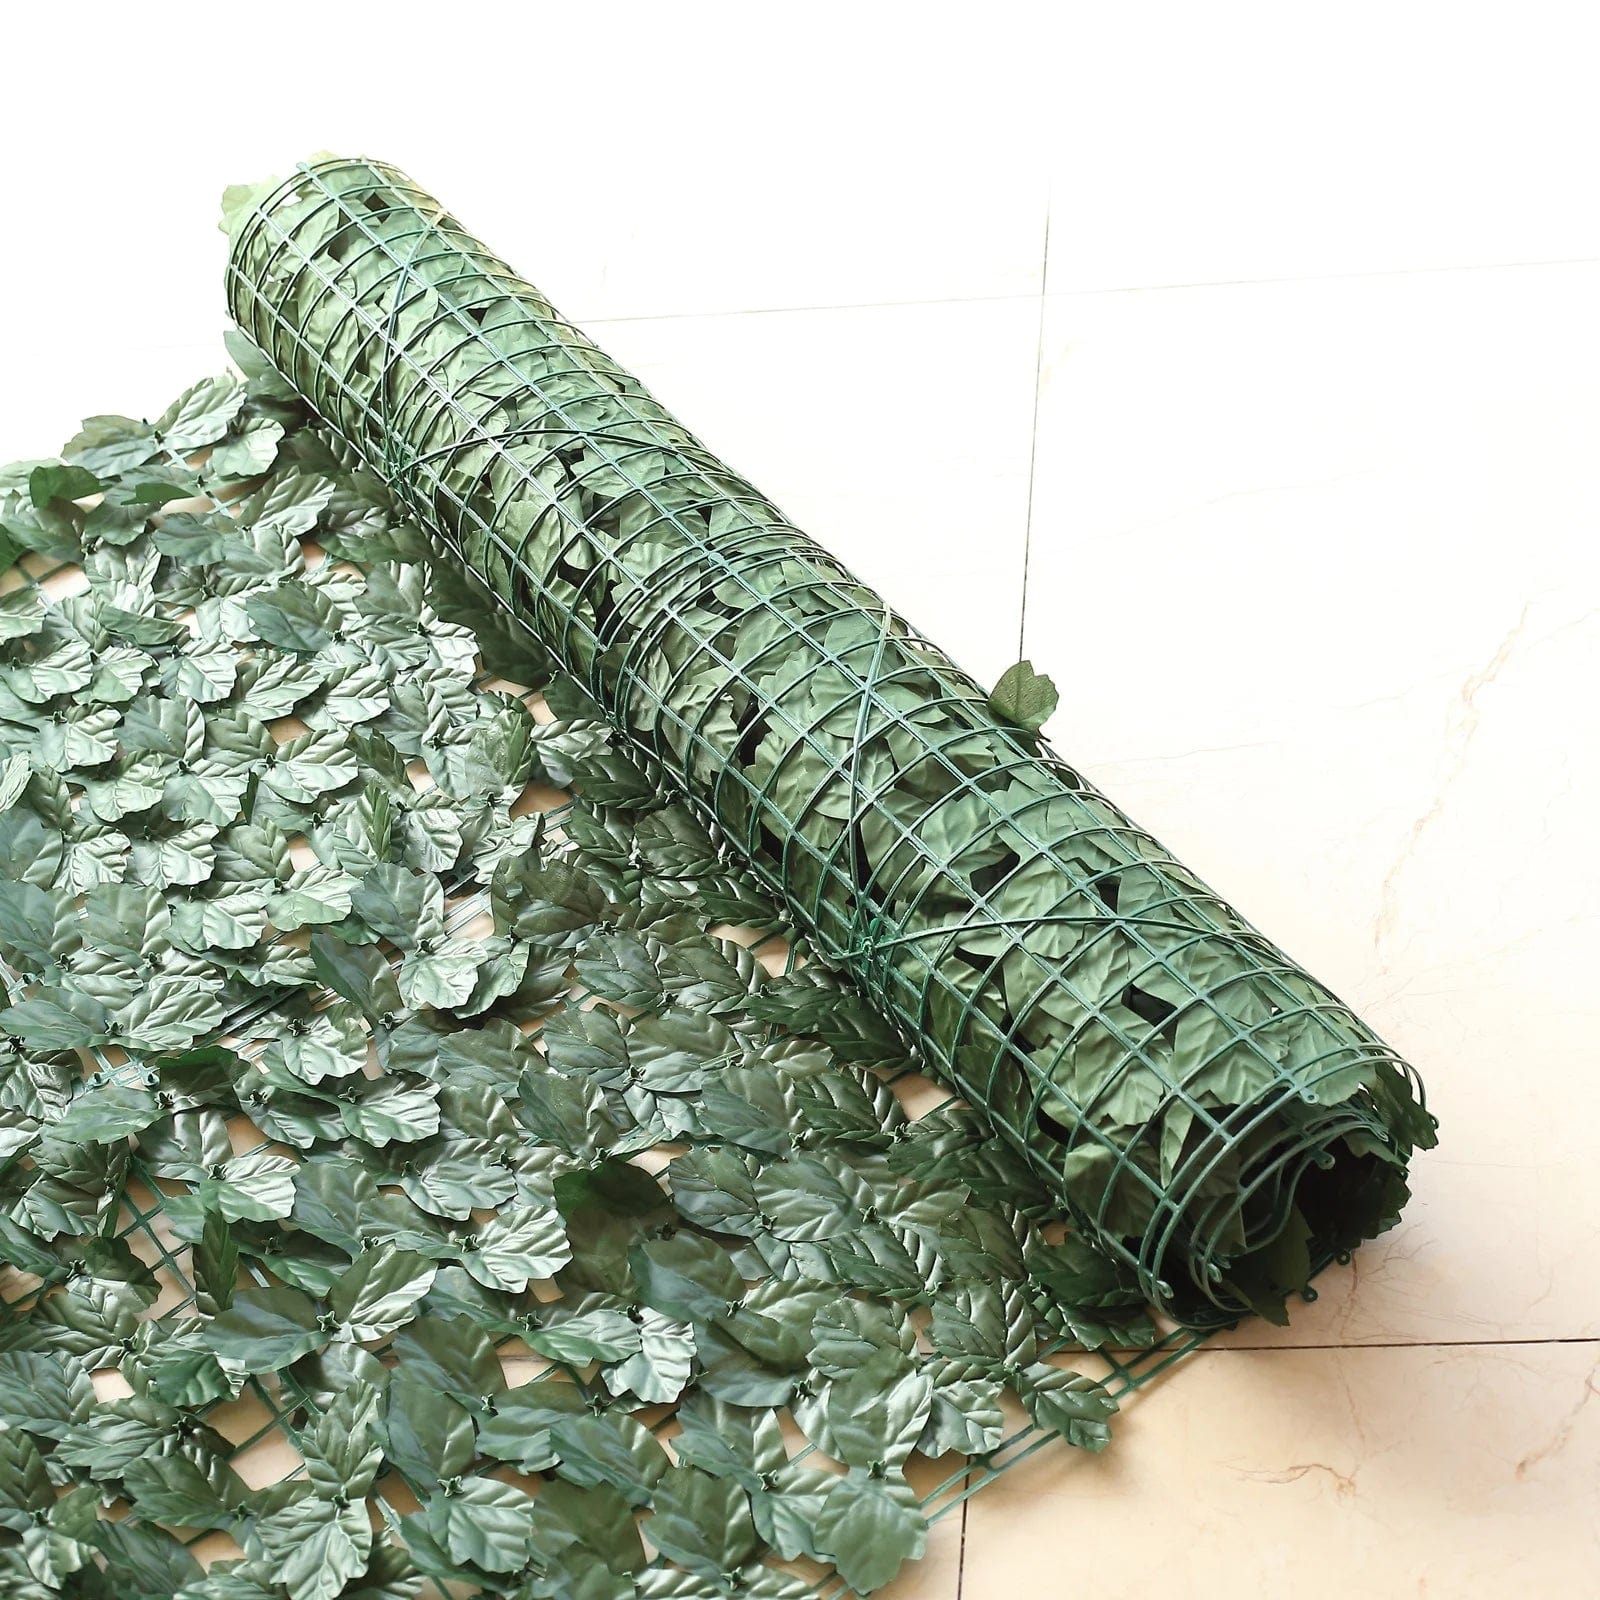 12 Dark Green Artificial Ivy Privacy Screen Fence Wall Panels